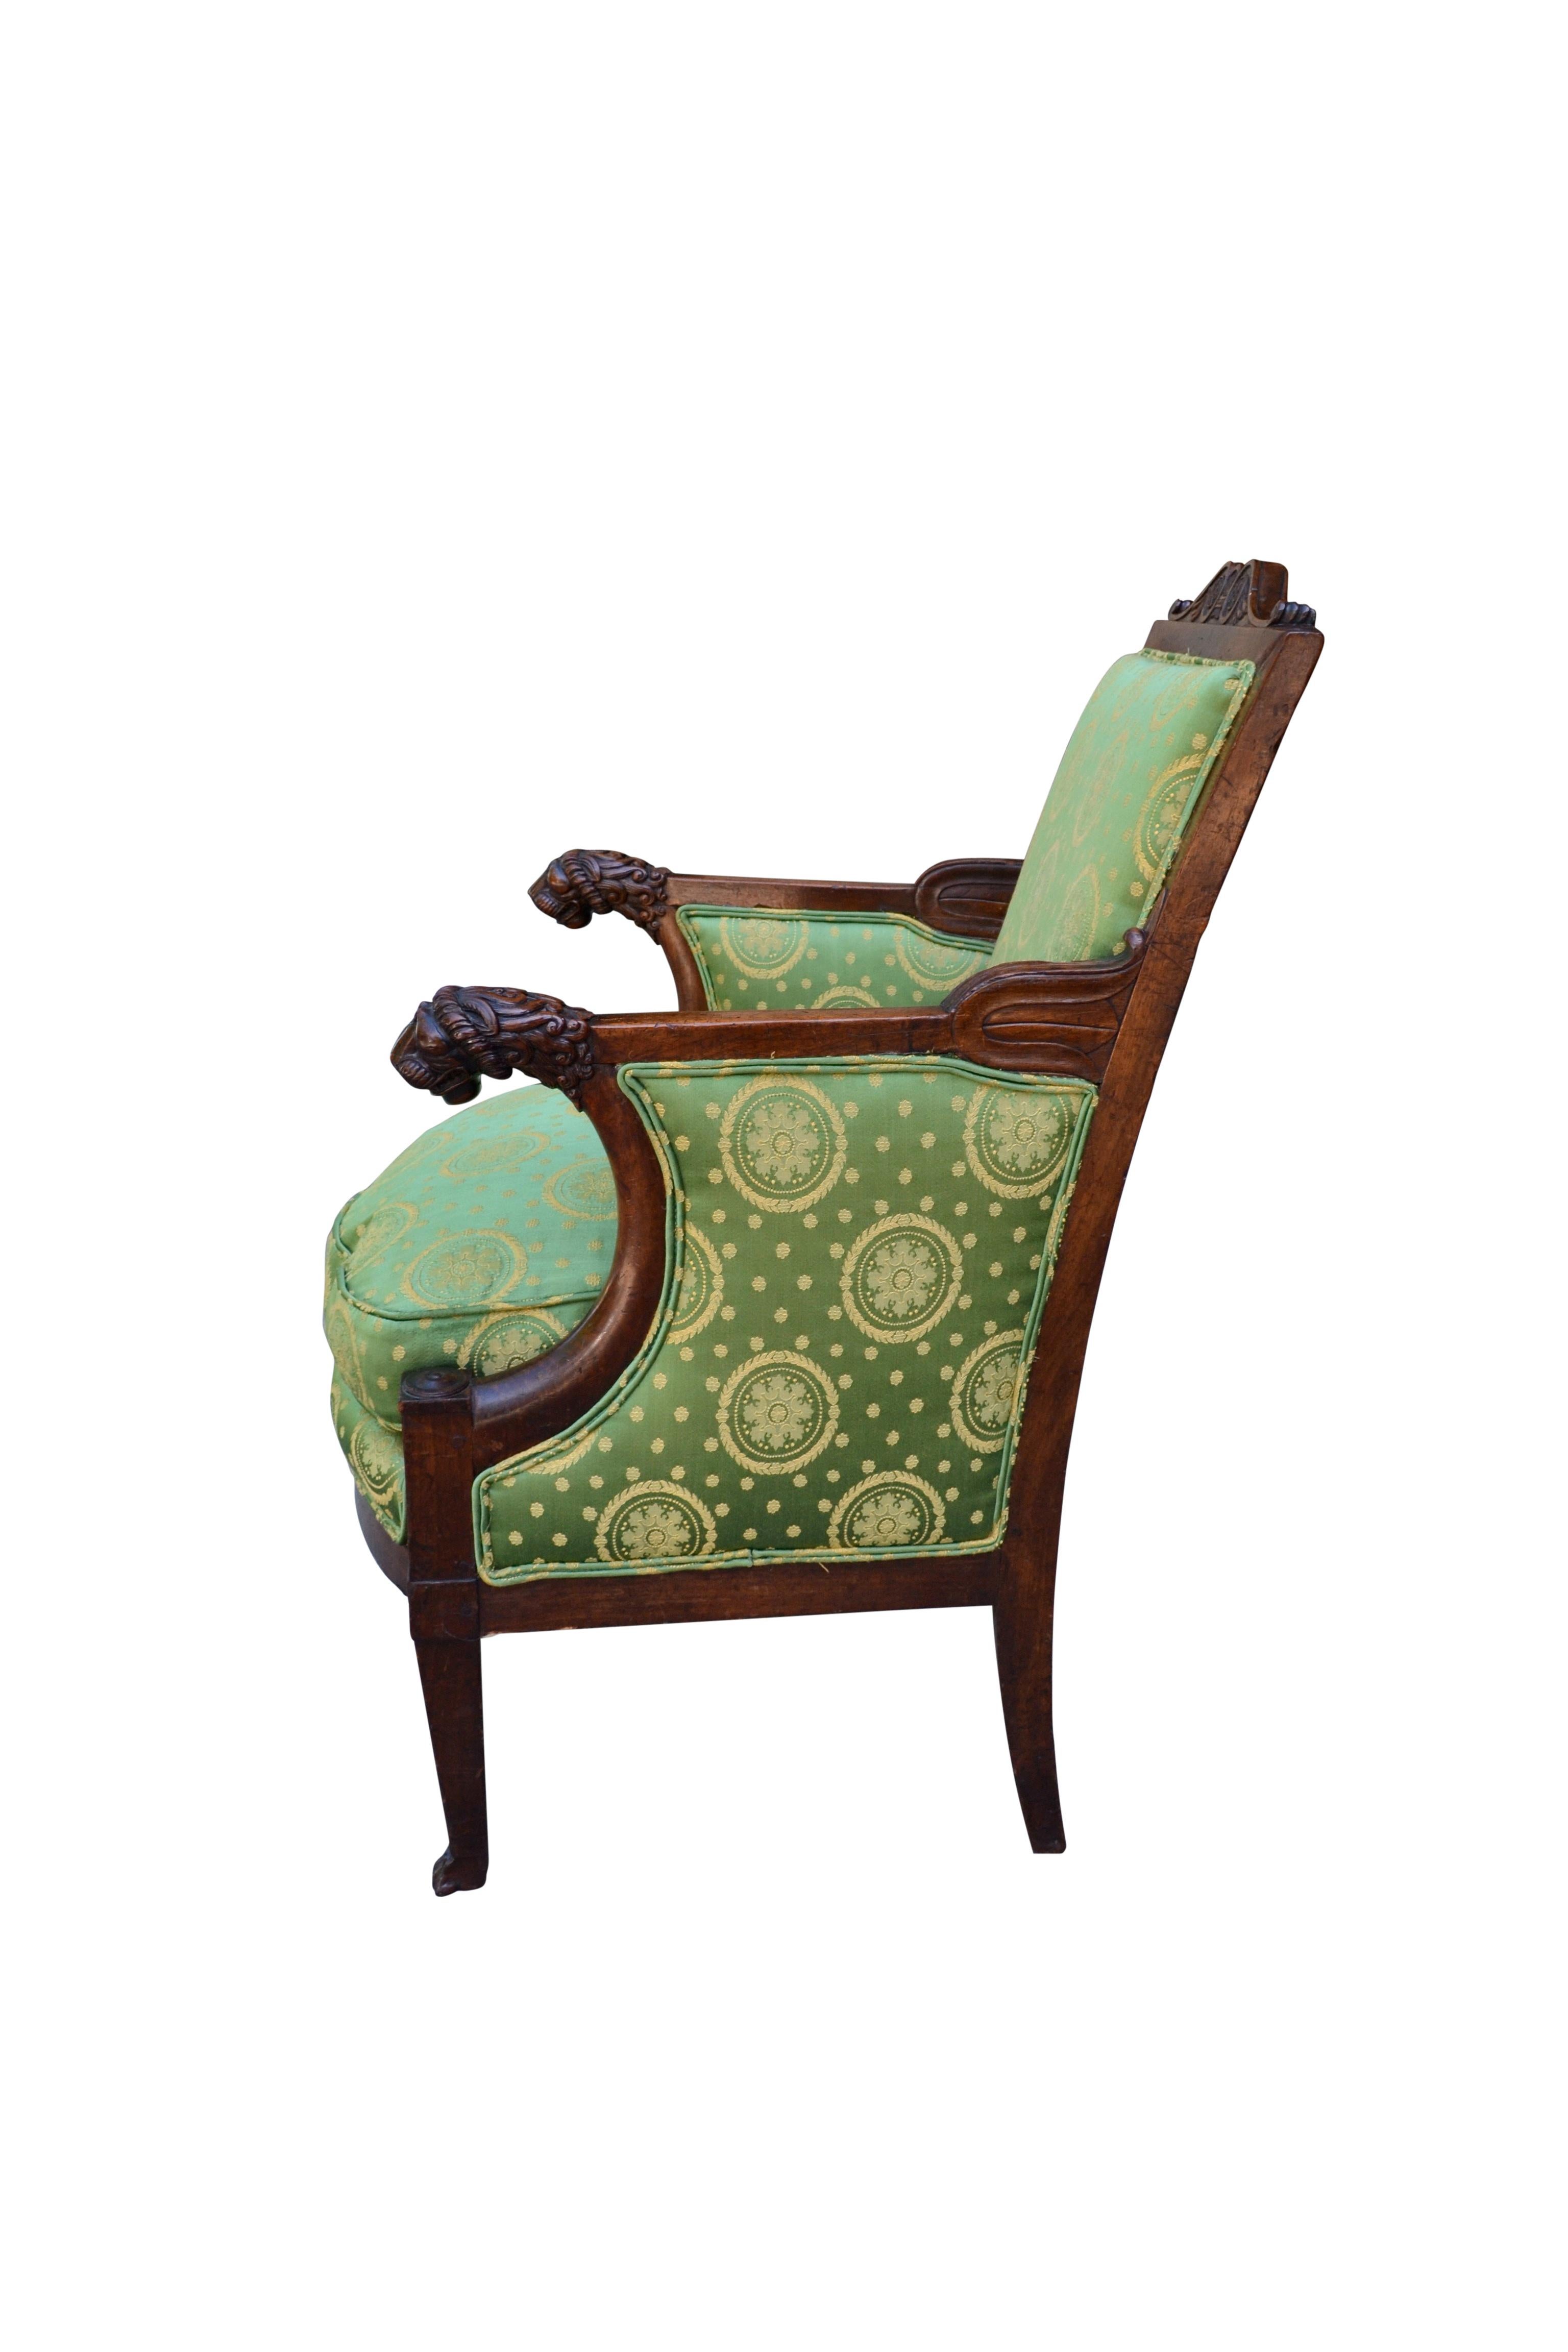 A period French Empire mahogany armchair with carved lion heads to the arms and lion's paw feet to the legs, upholstered in French Empire style green silk fabric.
  